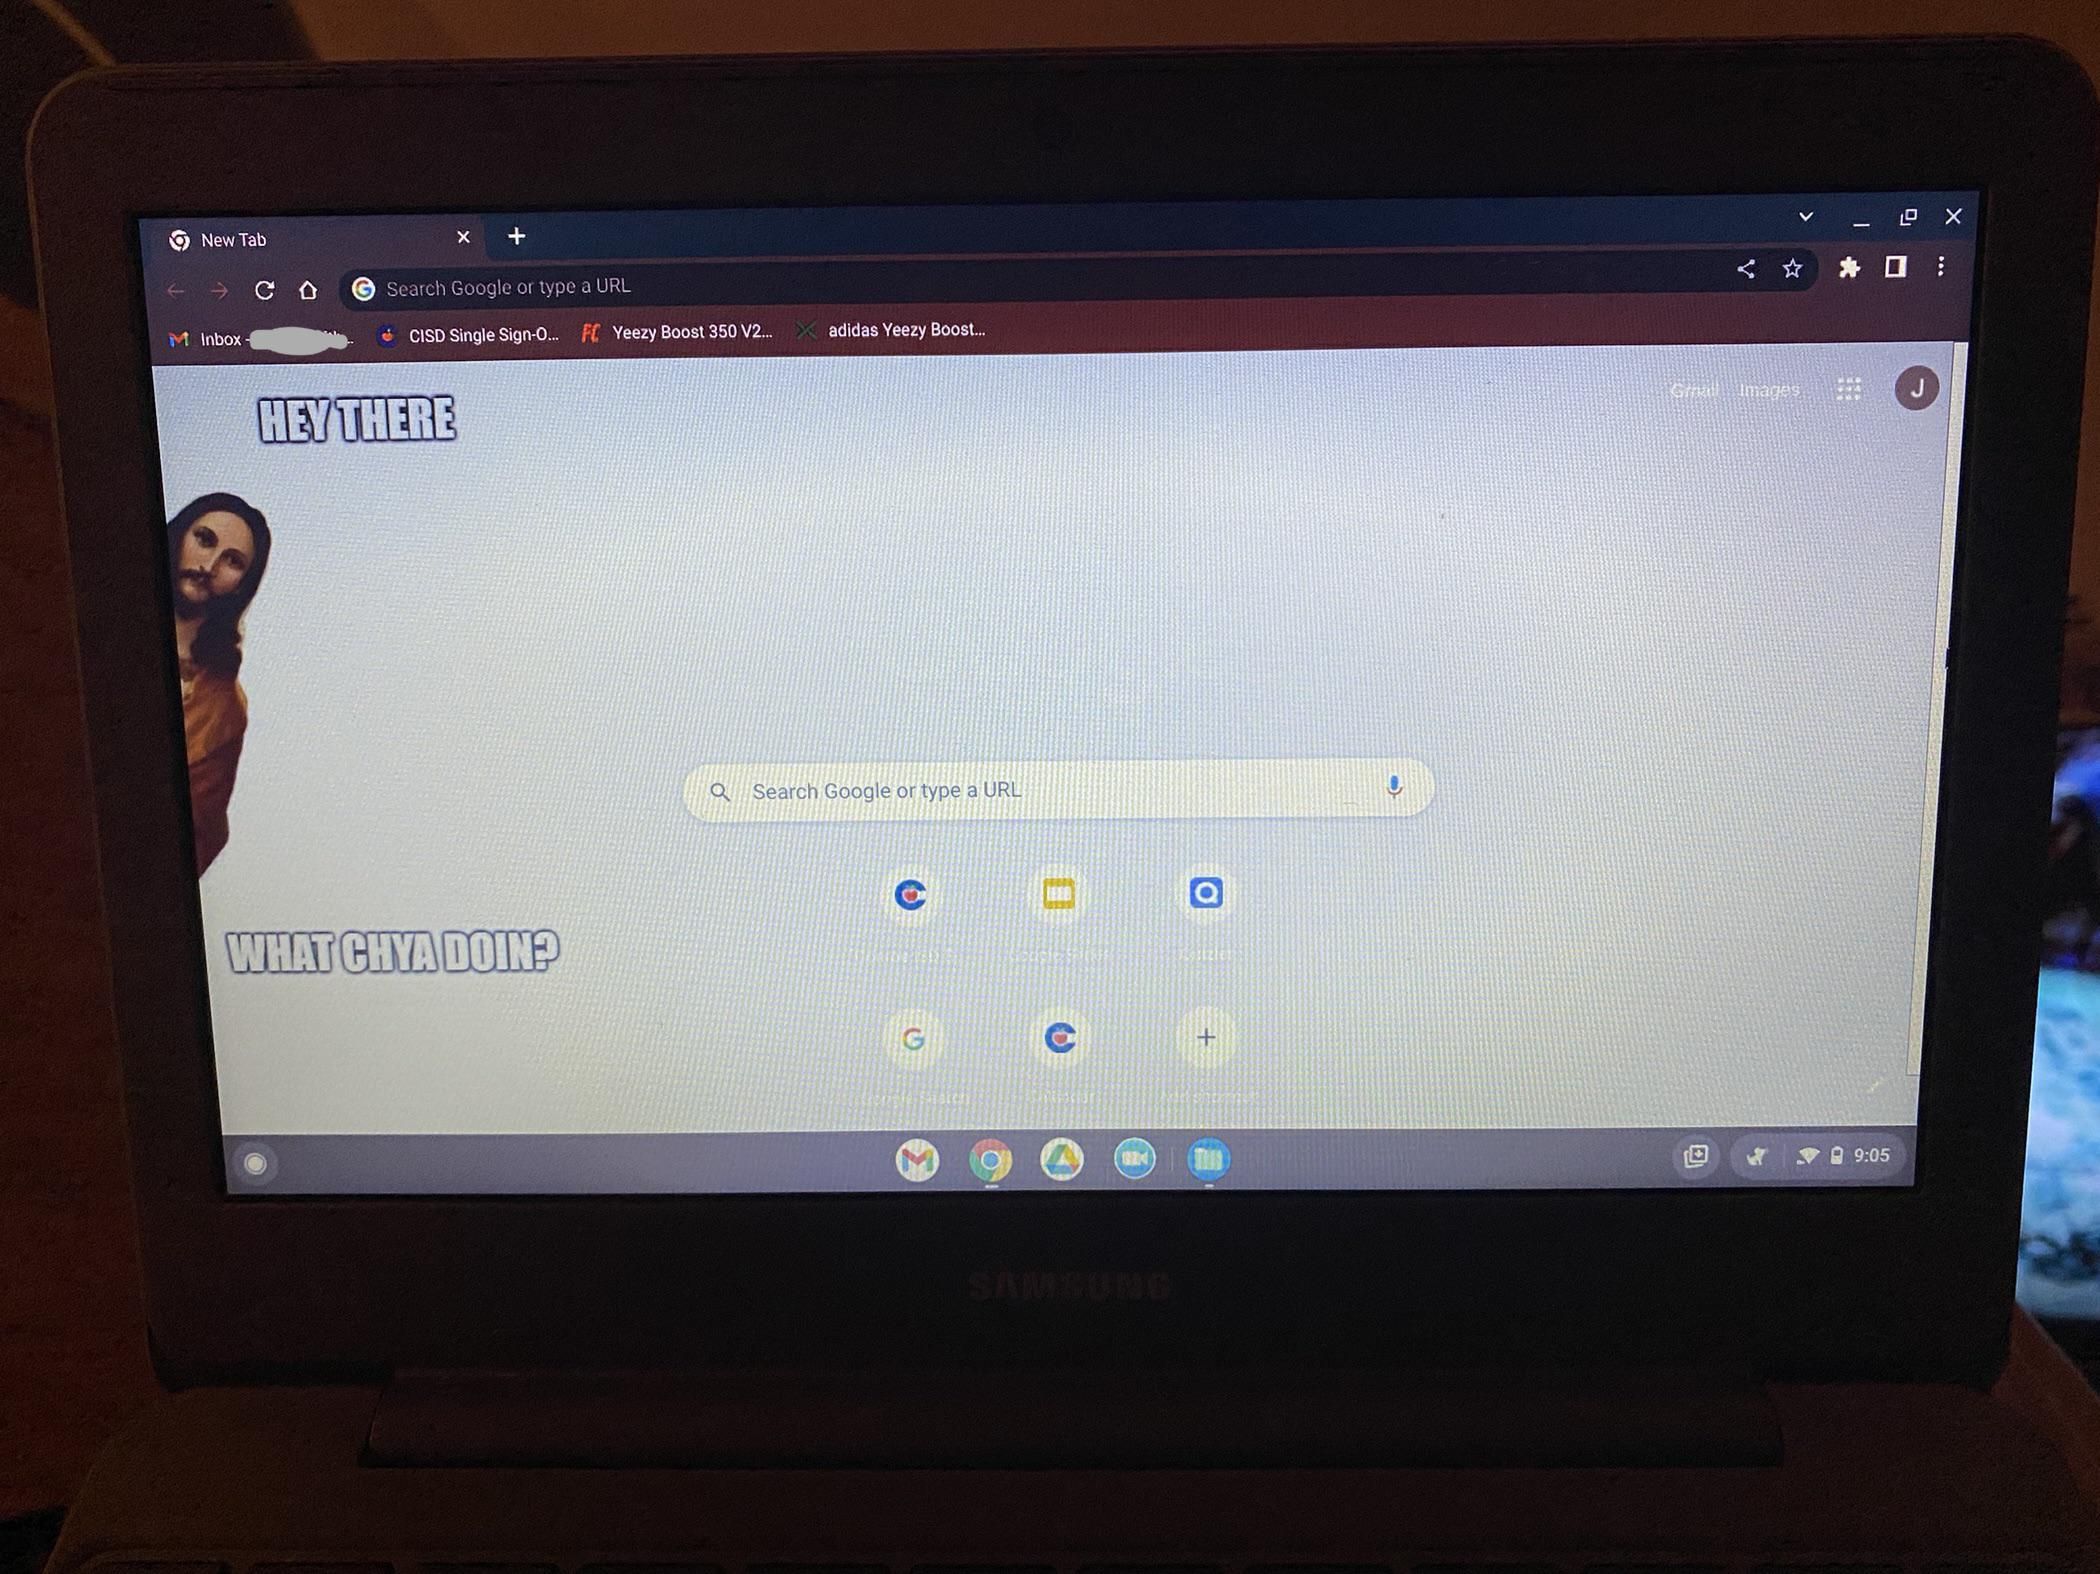 Son discovered porn, so I changed a few settings on his laptop.